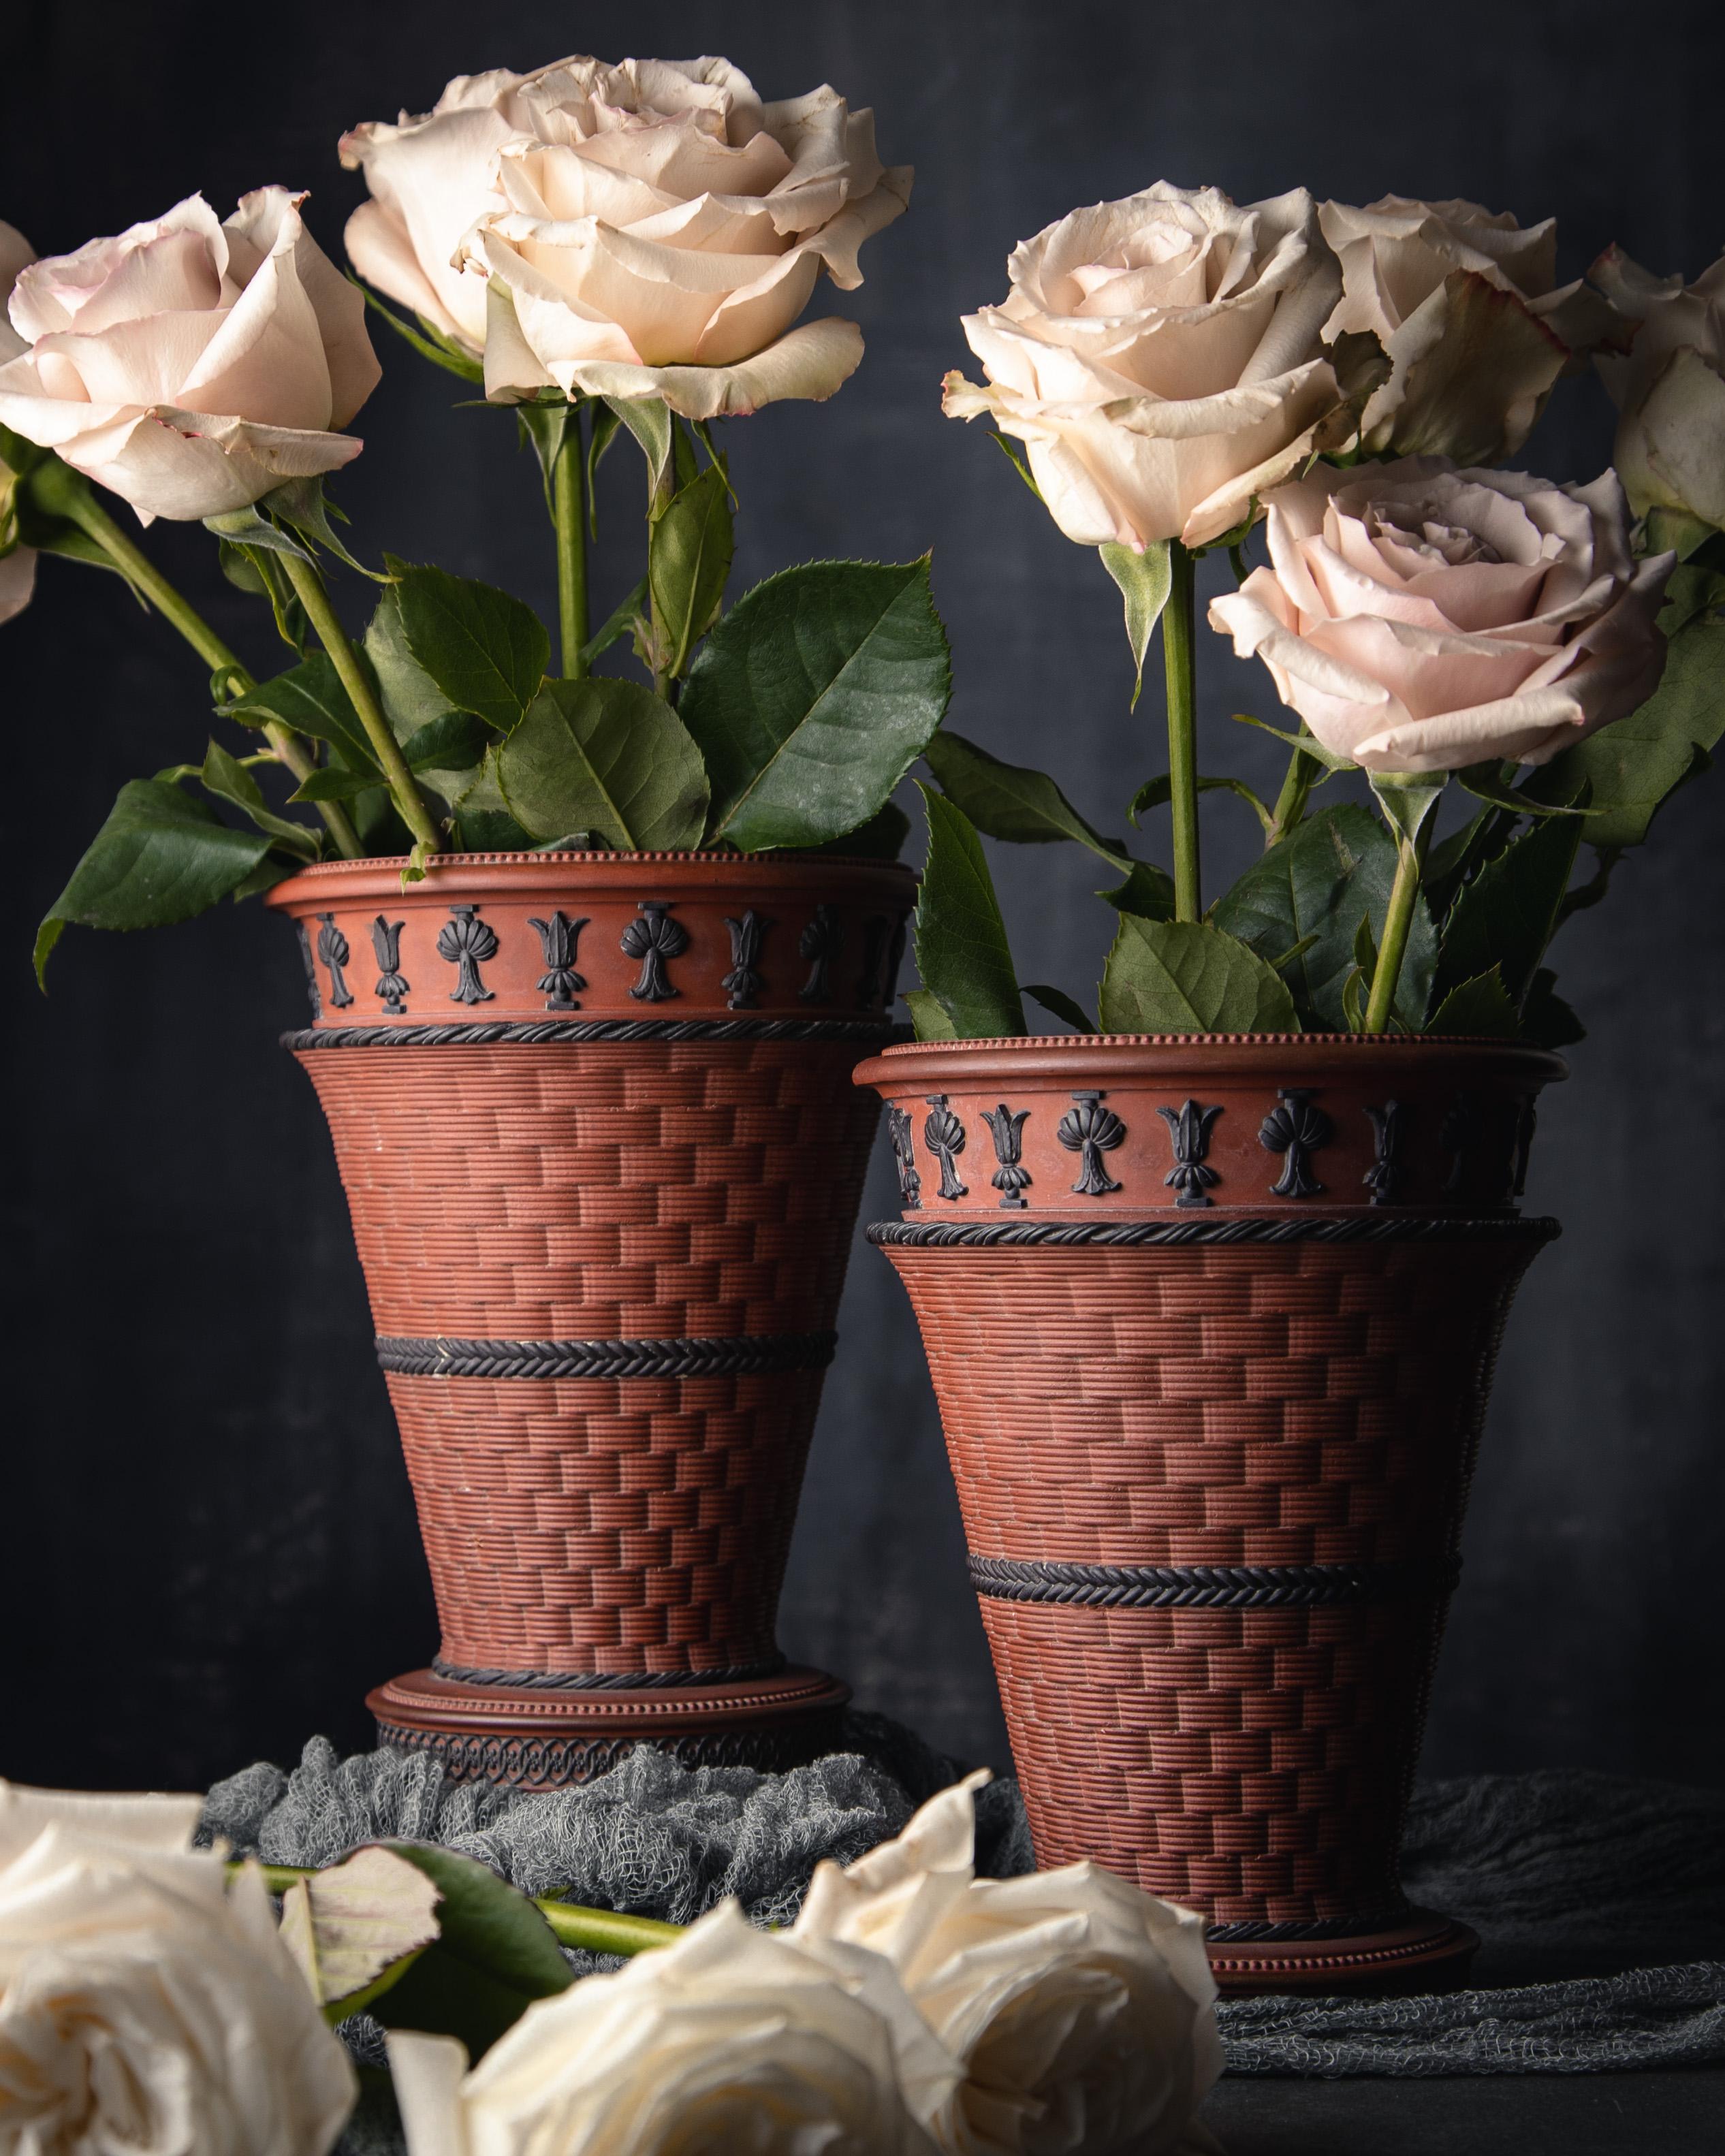 A pair of rosso antico jardinières made by Wedgwood, ca. 1810. This pair of jardinieres has a beautiful basketweave pattern accentuated by black basalt details in the Egyptian Revival style.

Developed by Josiah Wedgwood in the 1760s, rosso antico